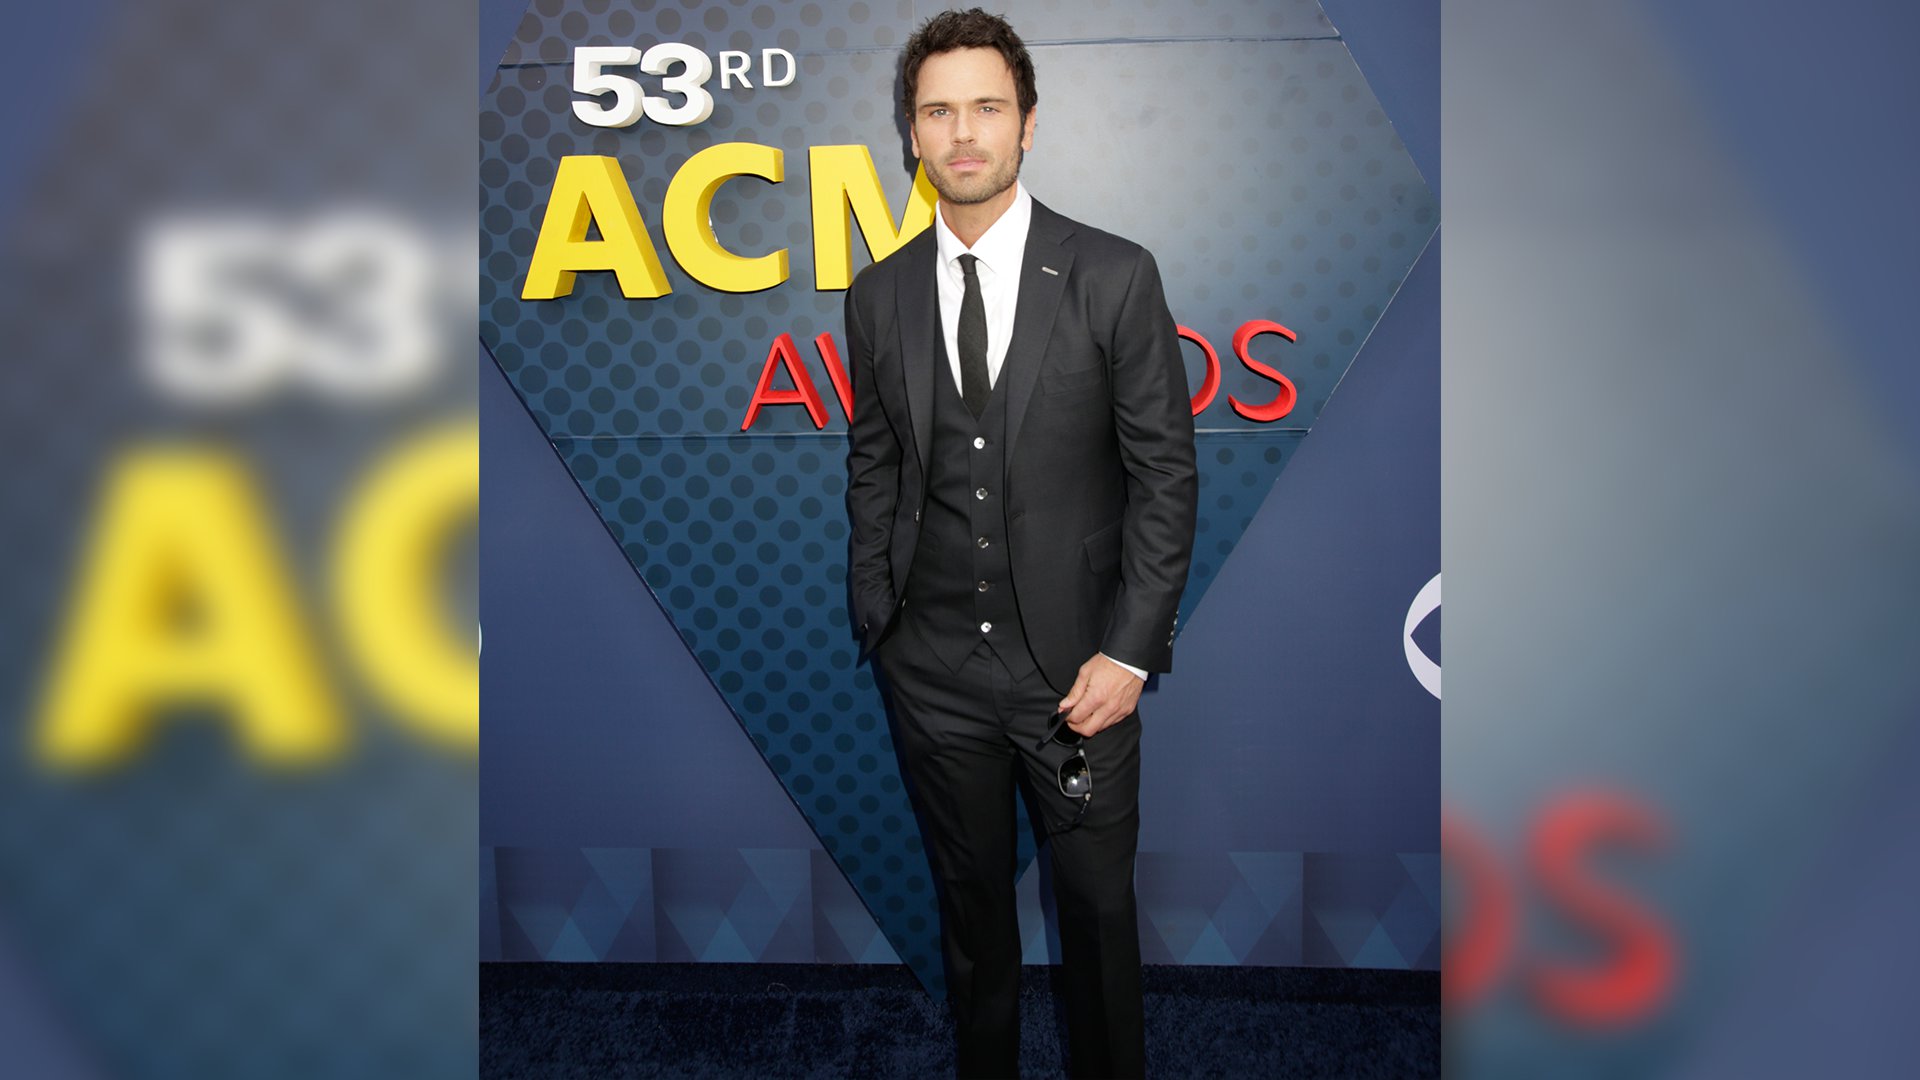 Singer Chuck Wicks looks wicked handsome in a three-piece suit.